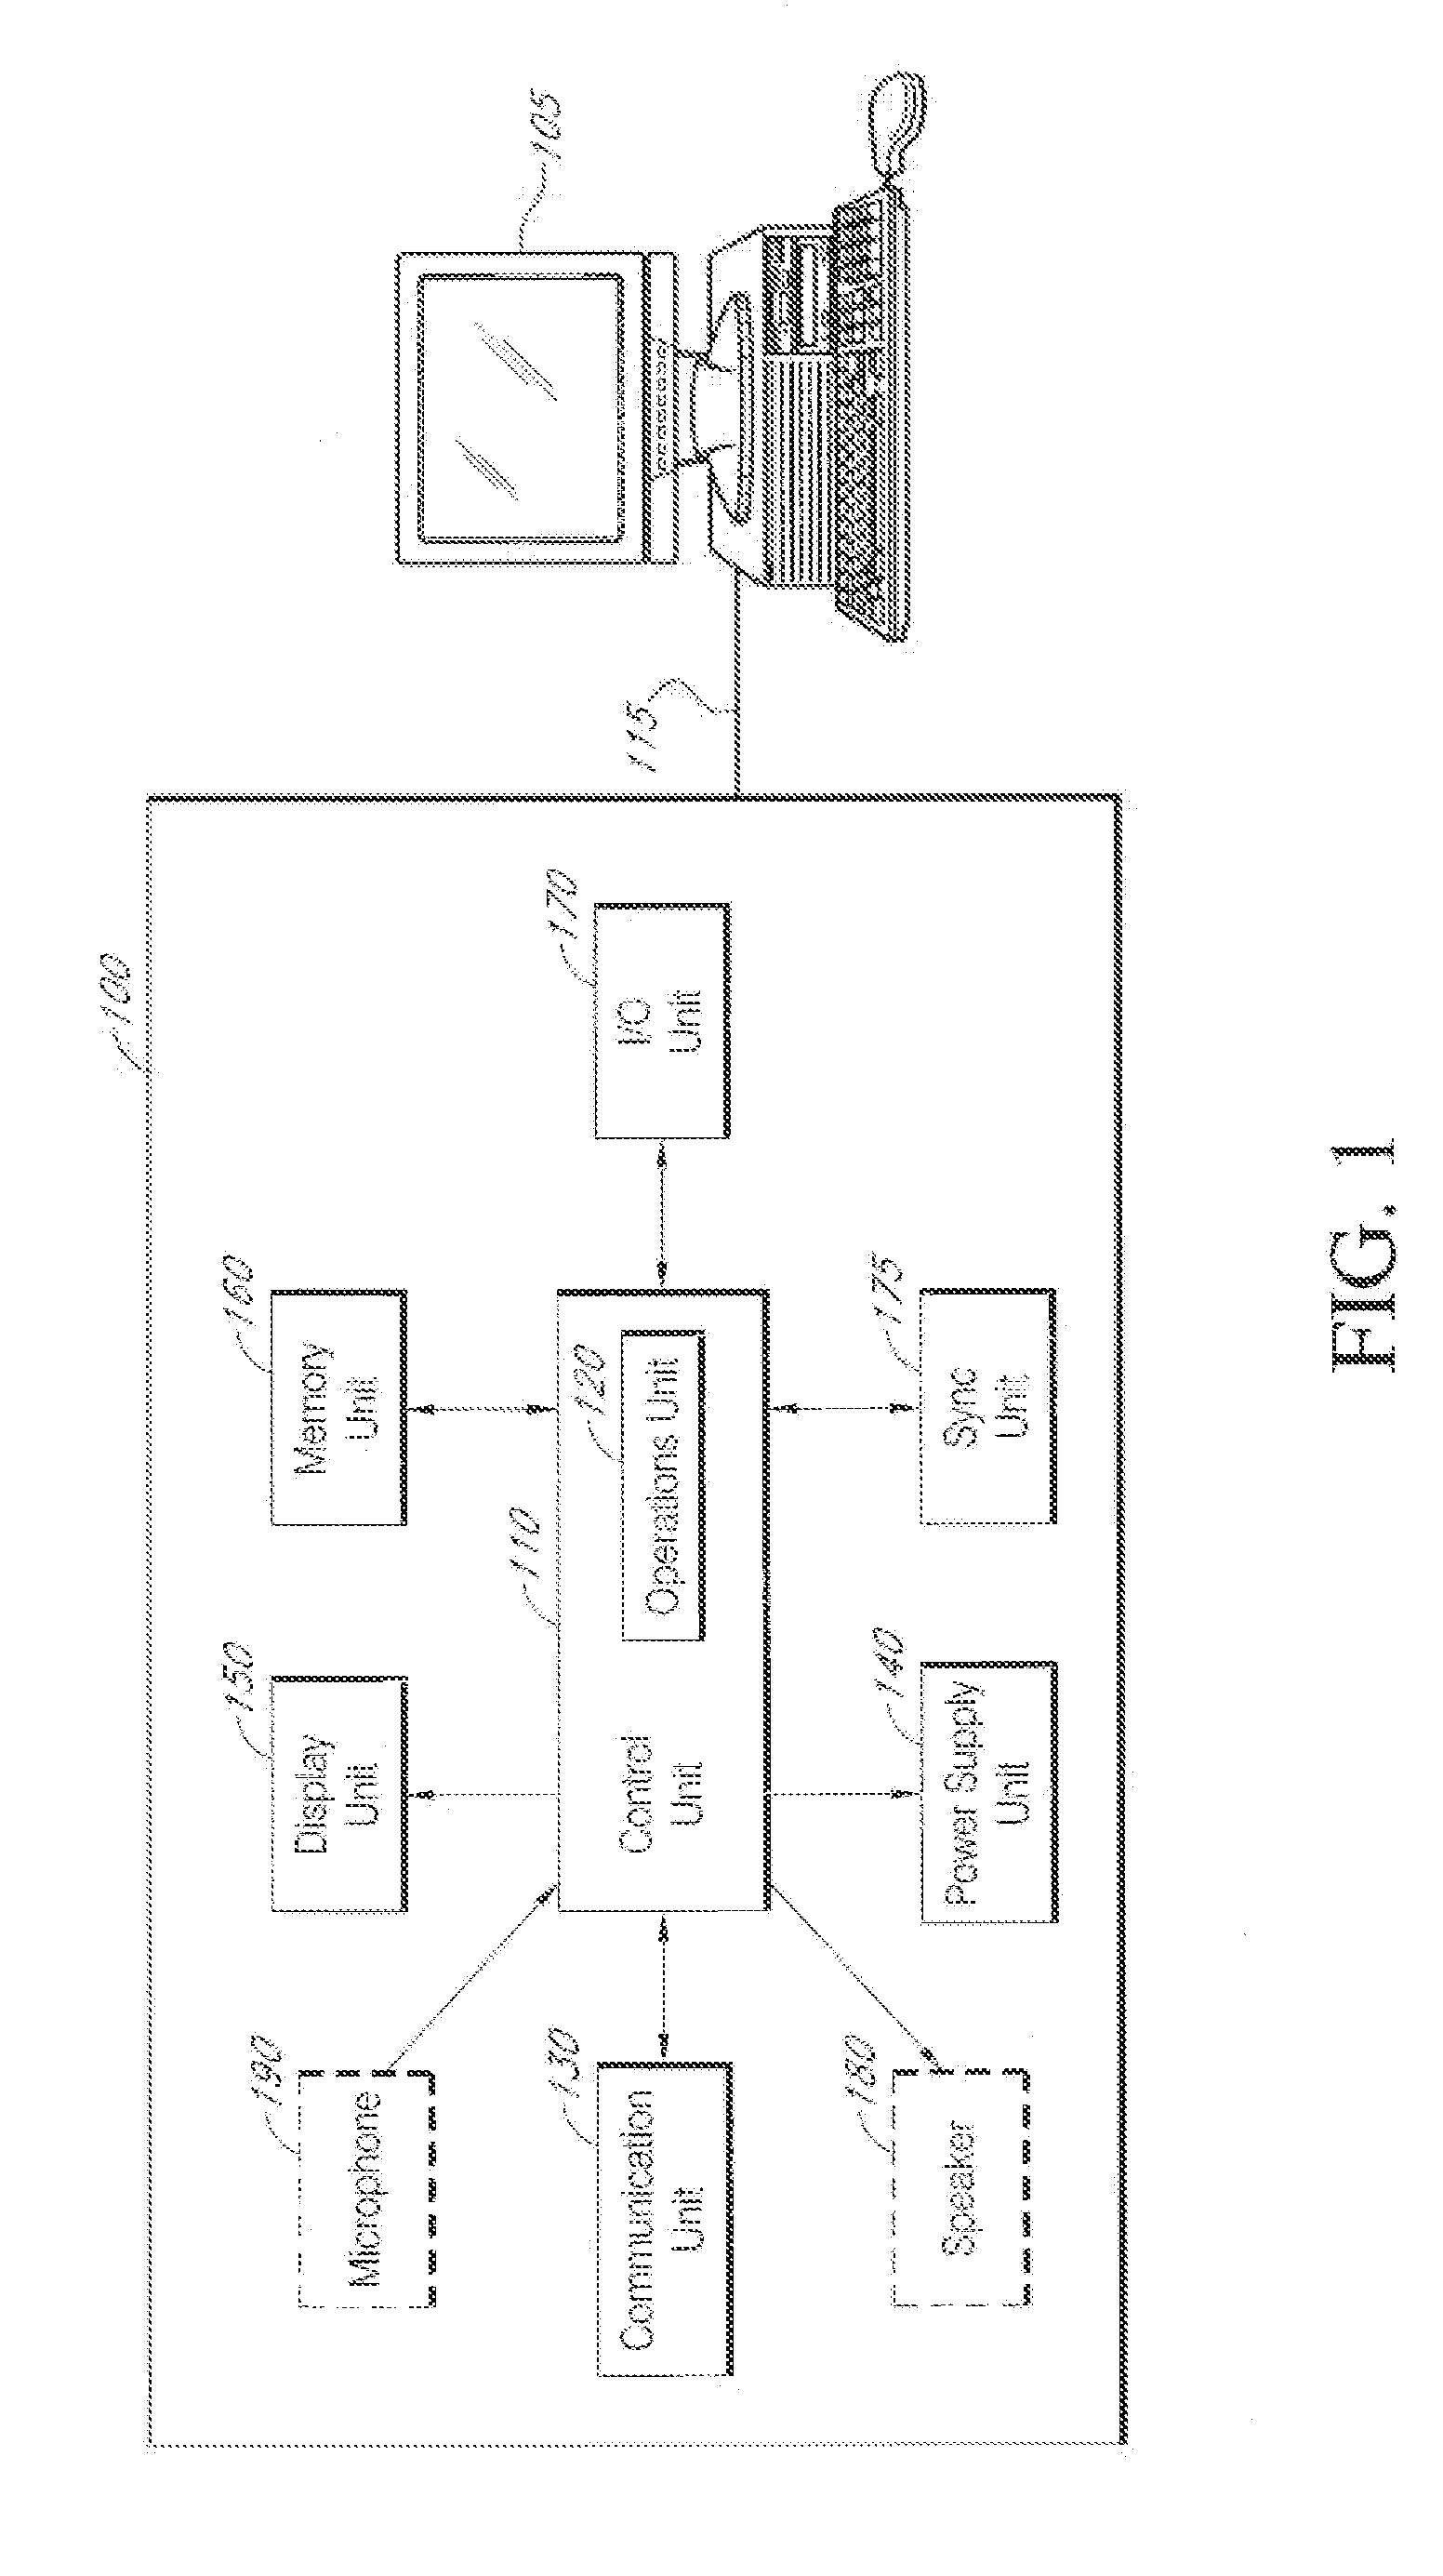 Electronic devices, systems, and methods for data exchange